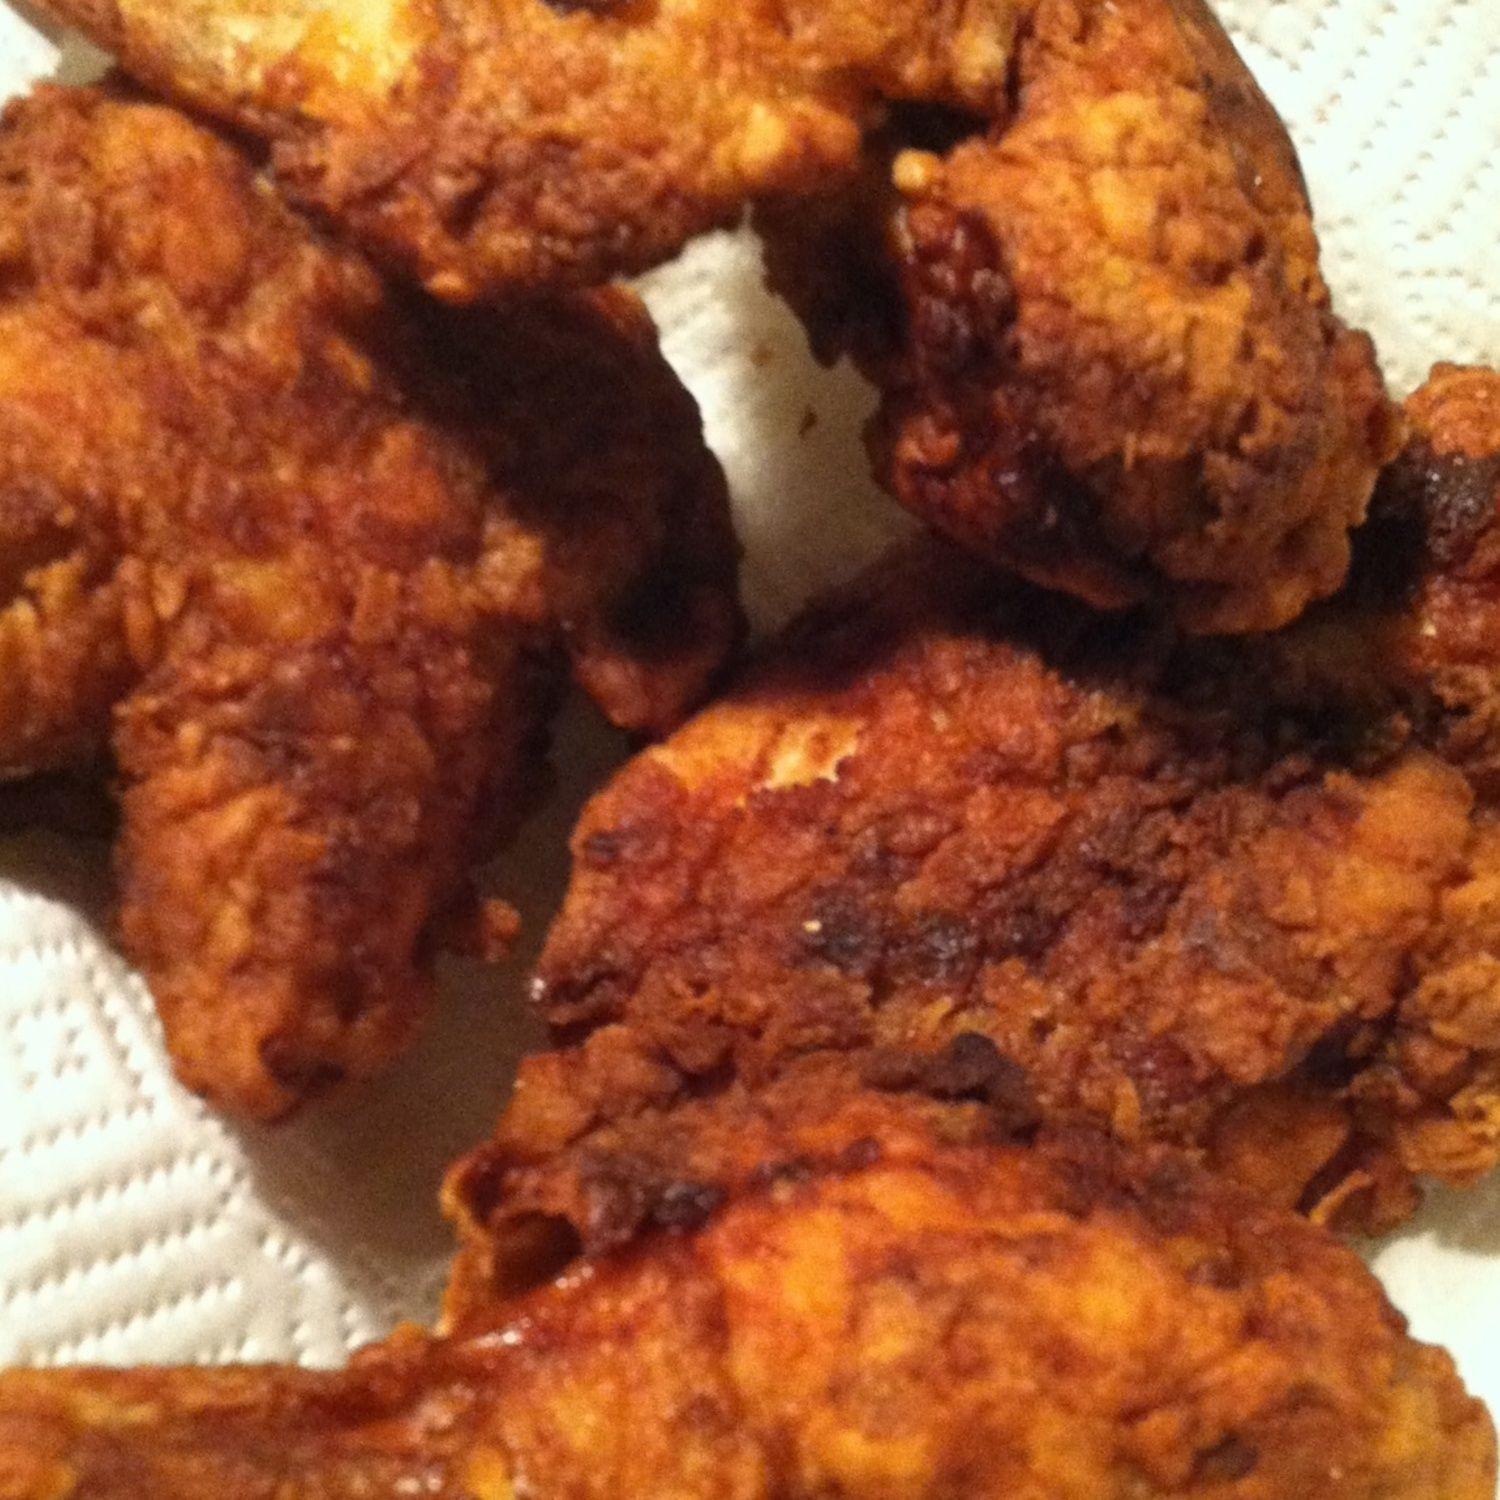 Pressure Cooking Fried Chicken Recipes
 "As Close to KFC as I Can Get it" Fried Chicken